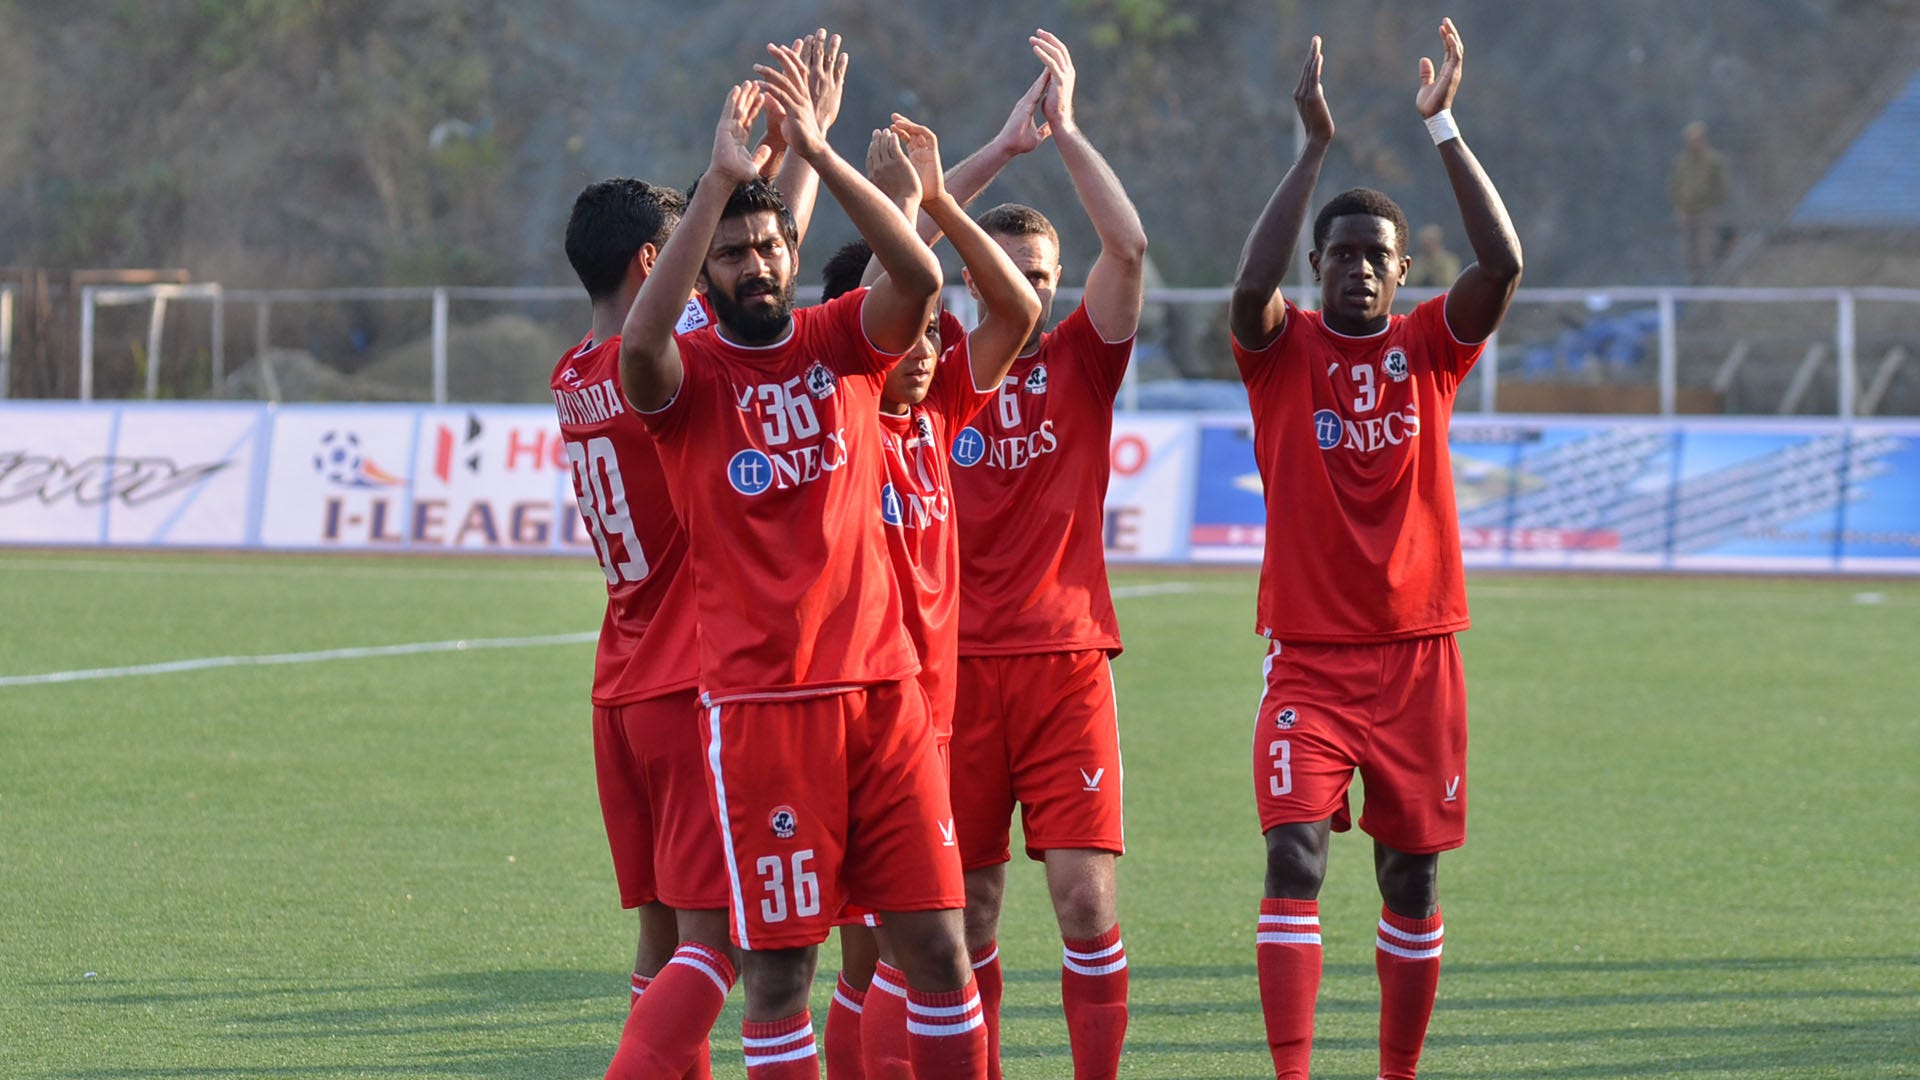 Latest news, features and gossip from the I-League